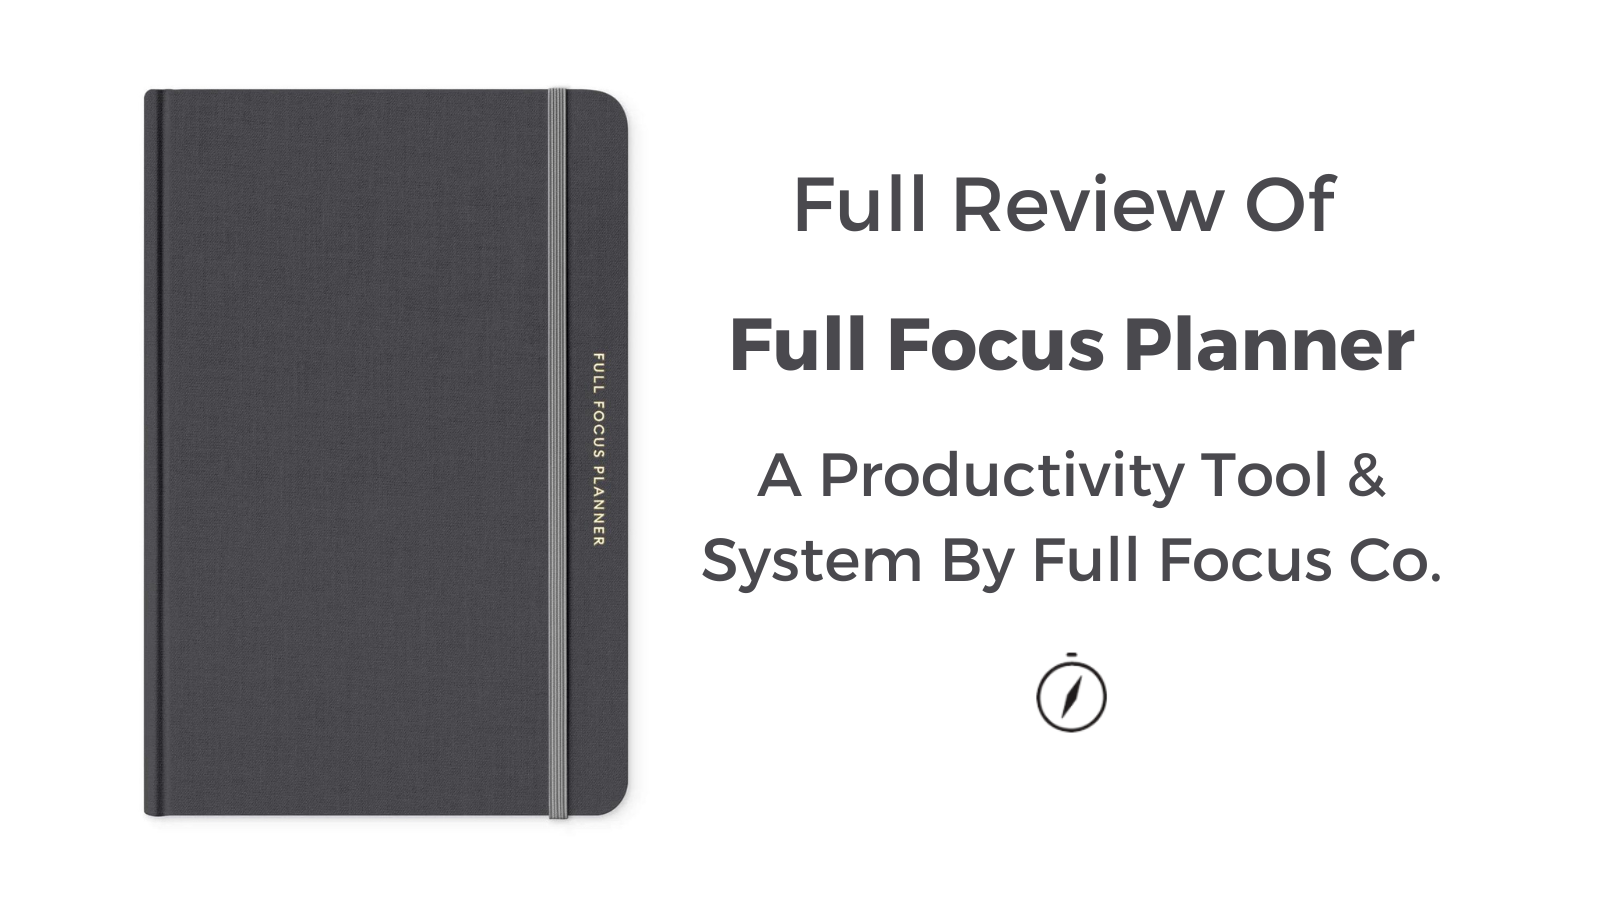 https://robbymiles.com/wp-content/uploads/2021/09/2023-Full-Focus-Planner-Review-Featured.png